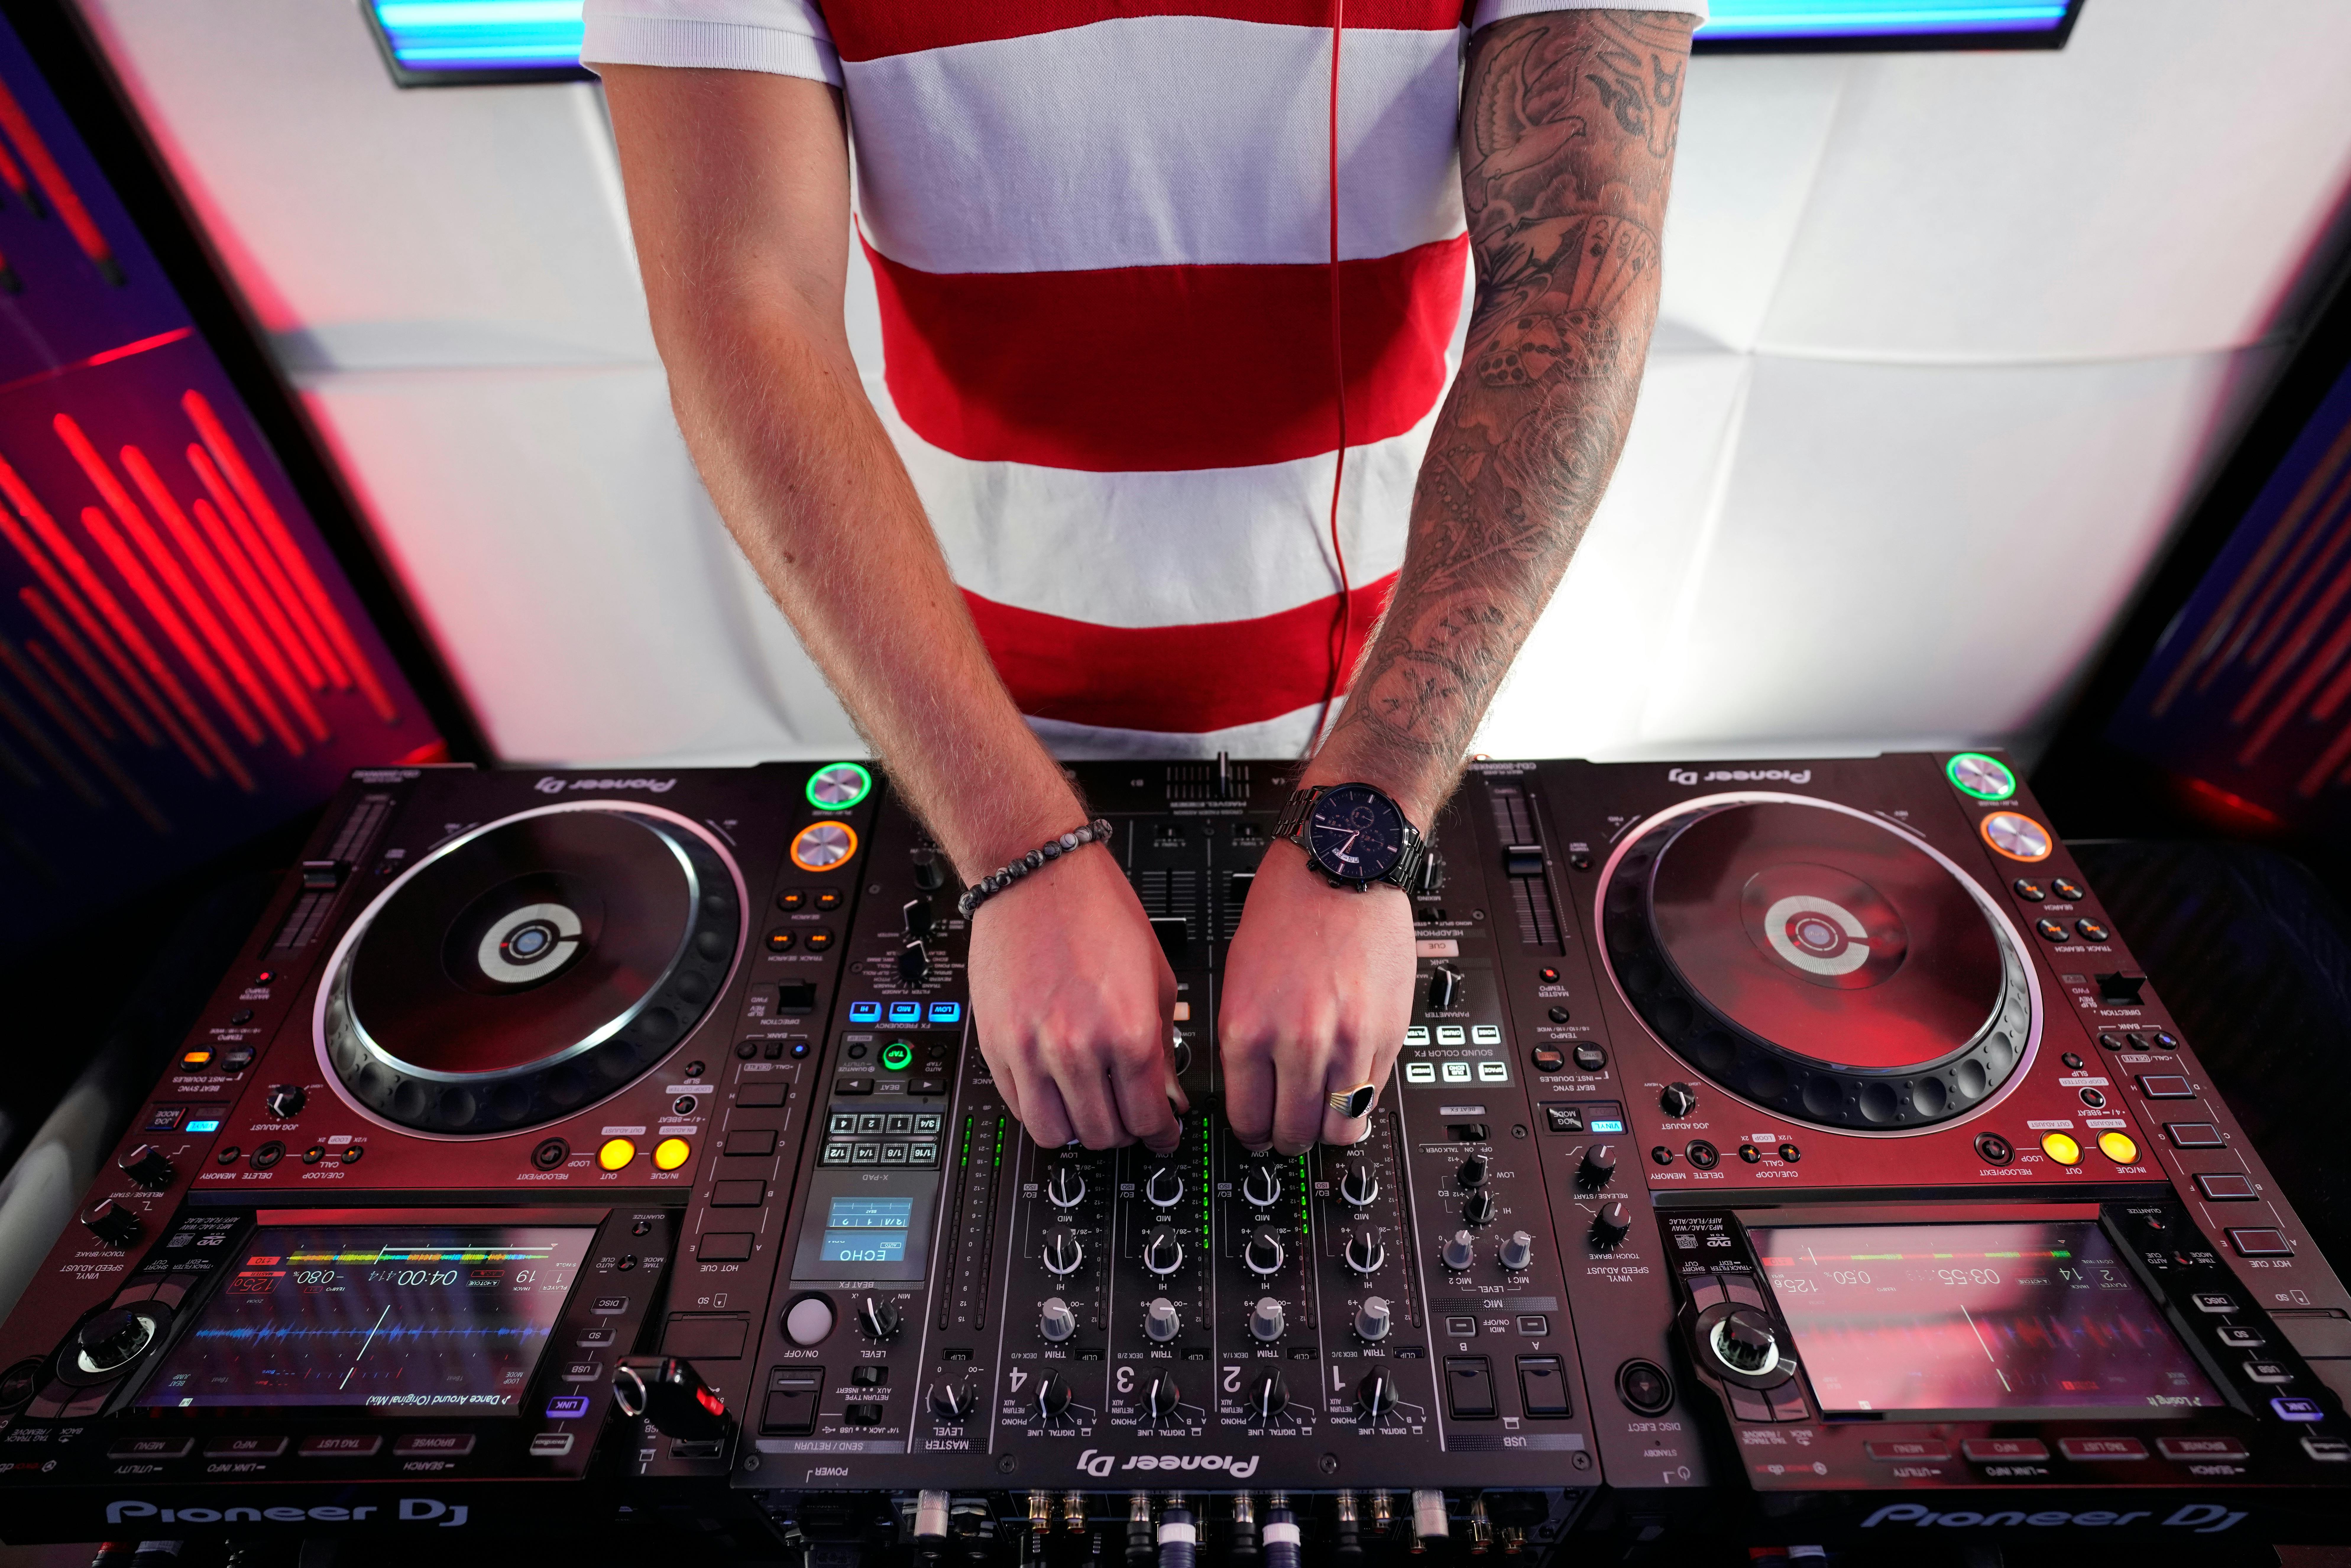 Download Dj wallpapers for mobile phone free Dj HD pictures